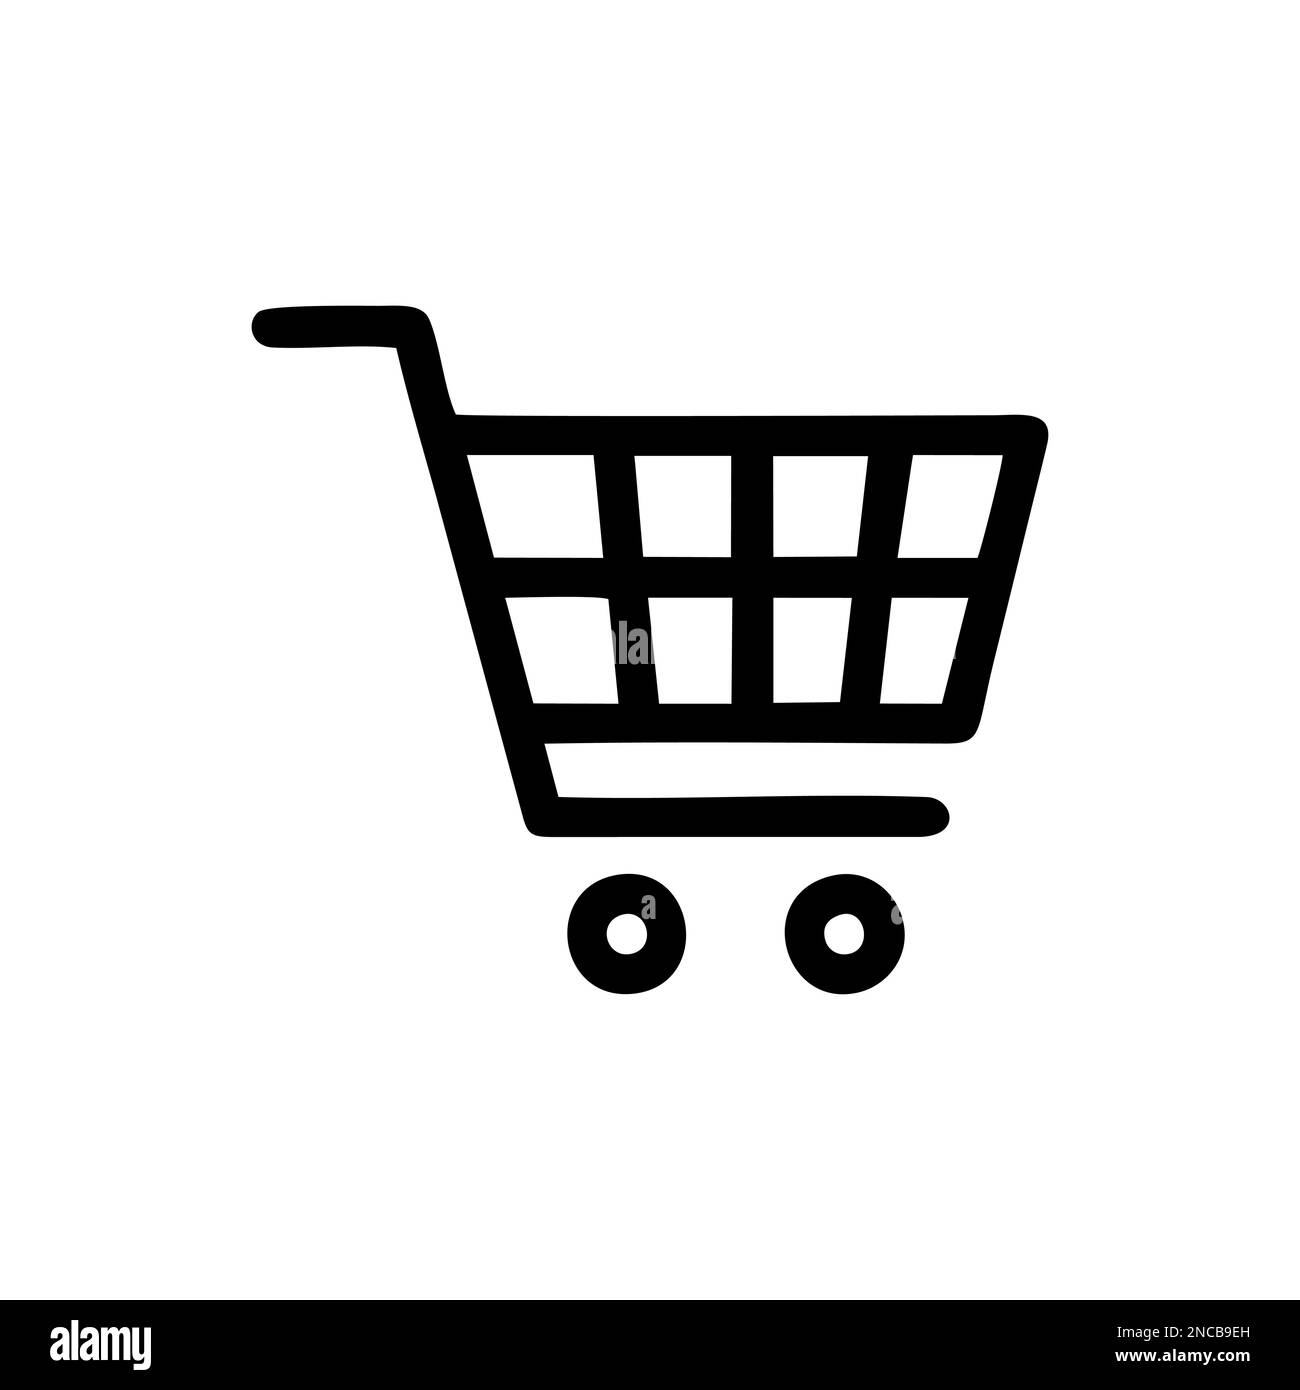 SHOPPING CART PICTOGRAM IN BLACK COLOR, ELECTRONIC PURCHASES Stock Vector